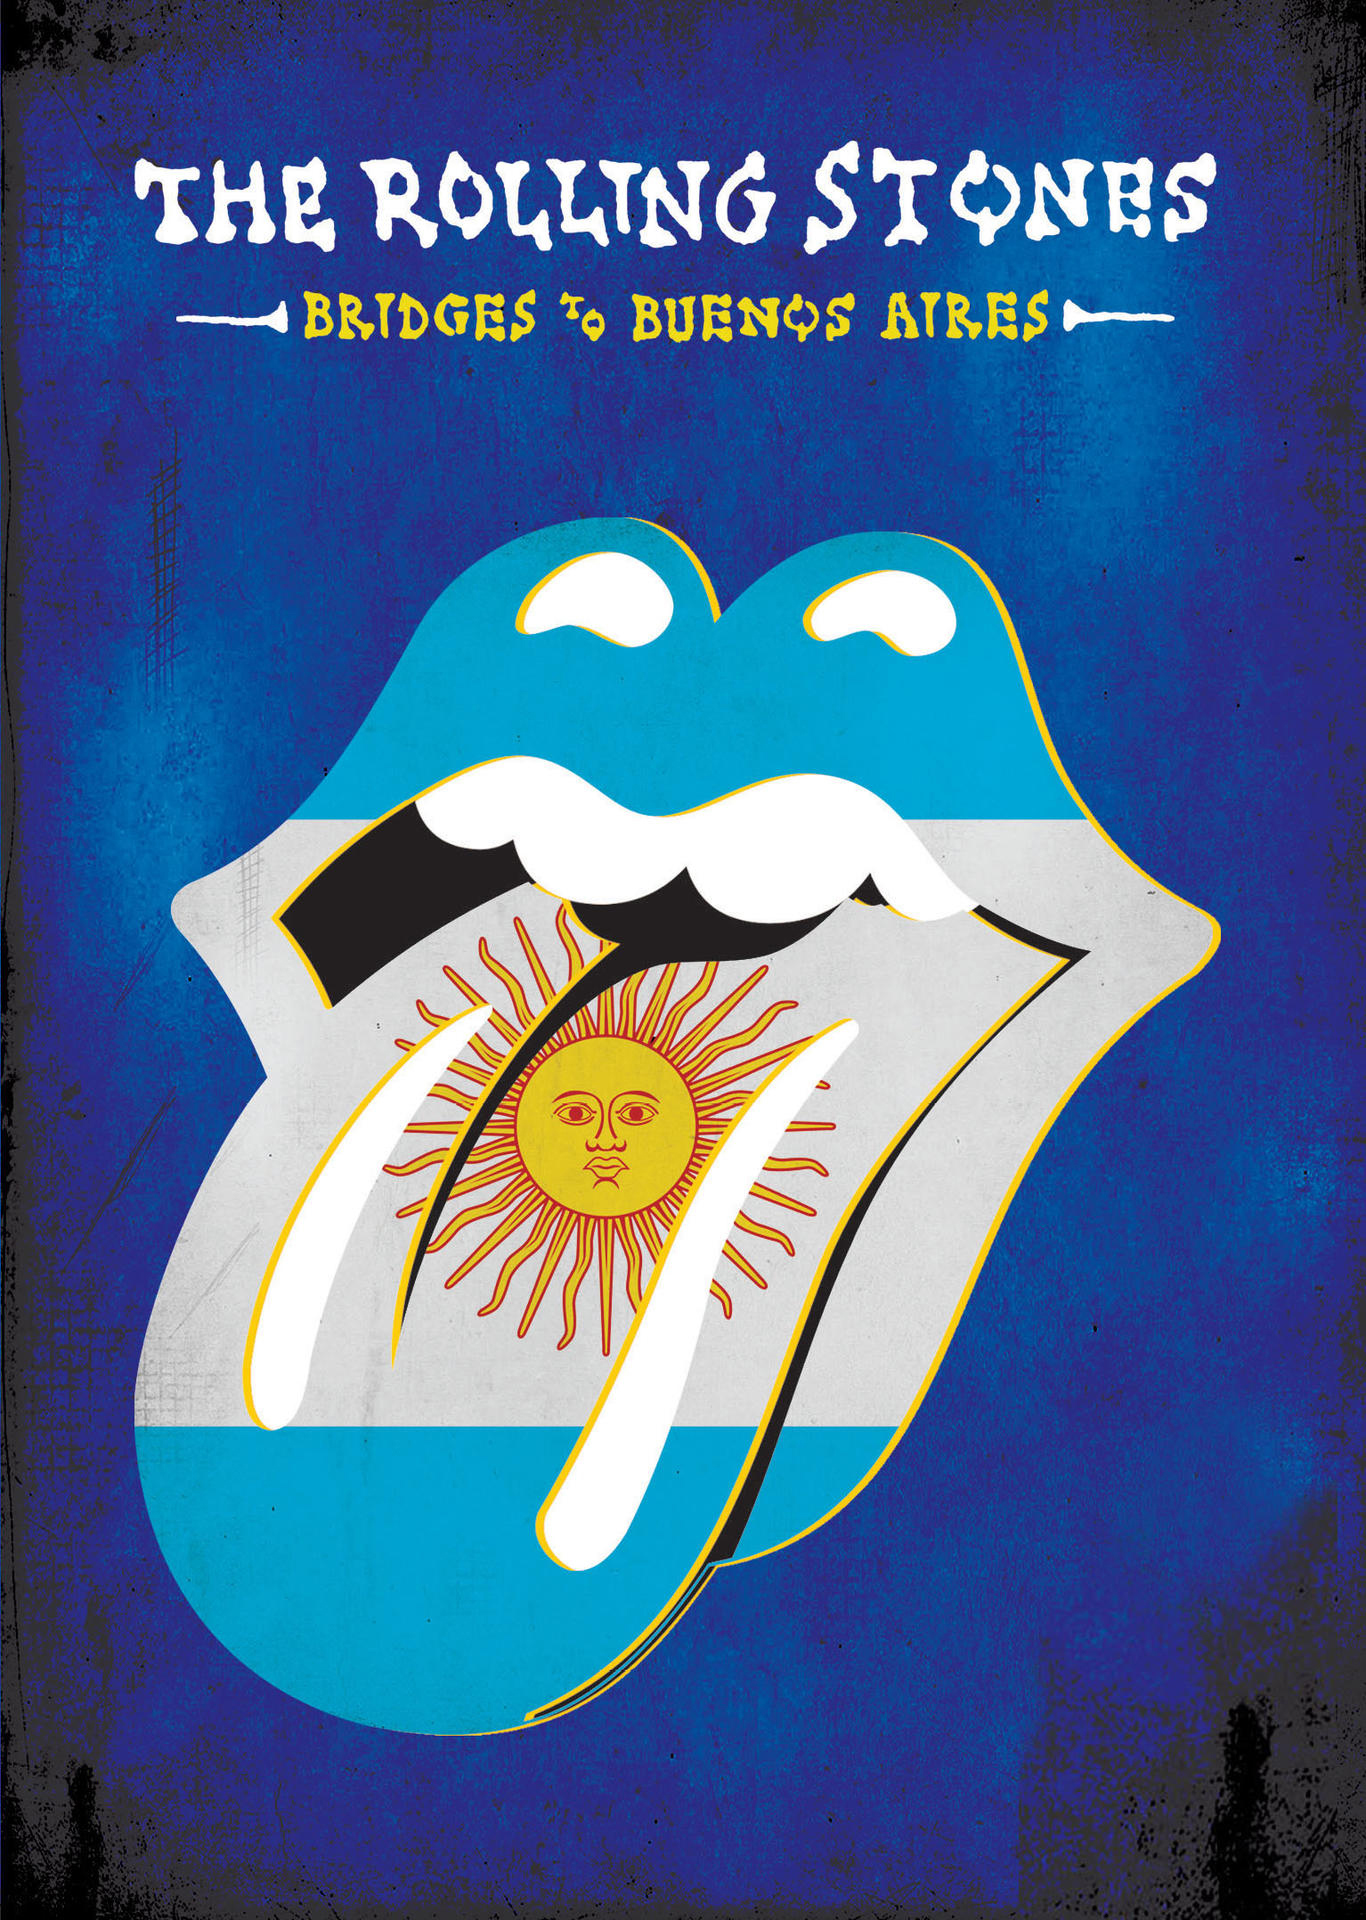 Buenos To - Rolling Disc) - (CD Bridges Aires The + Stones Blu-ray